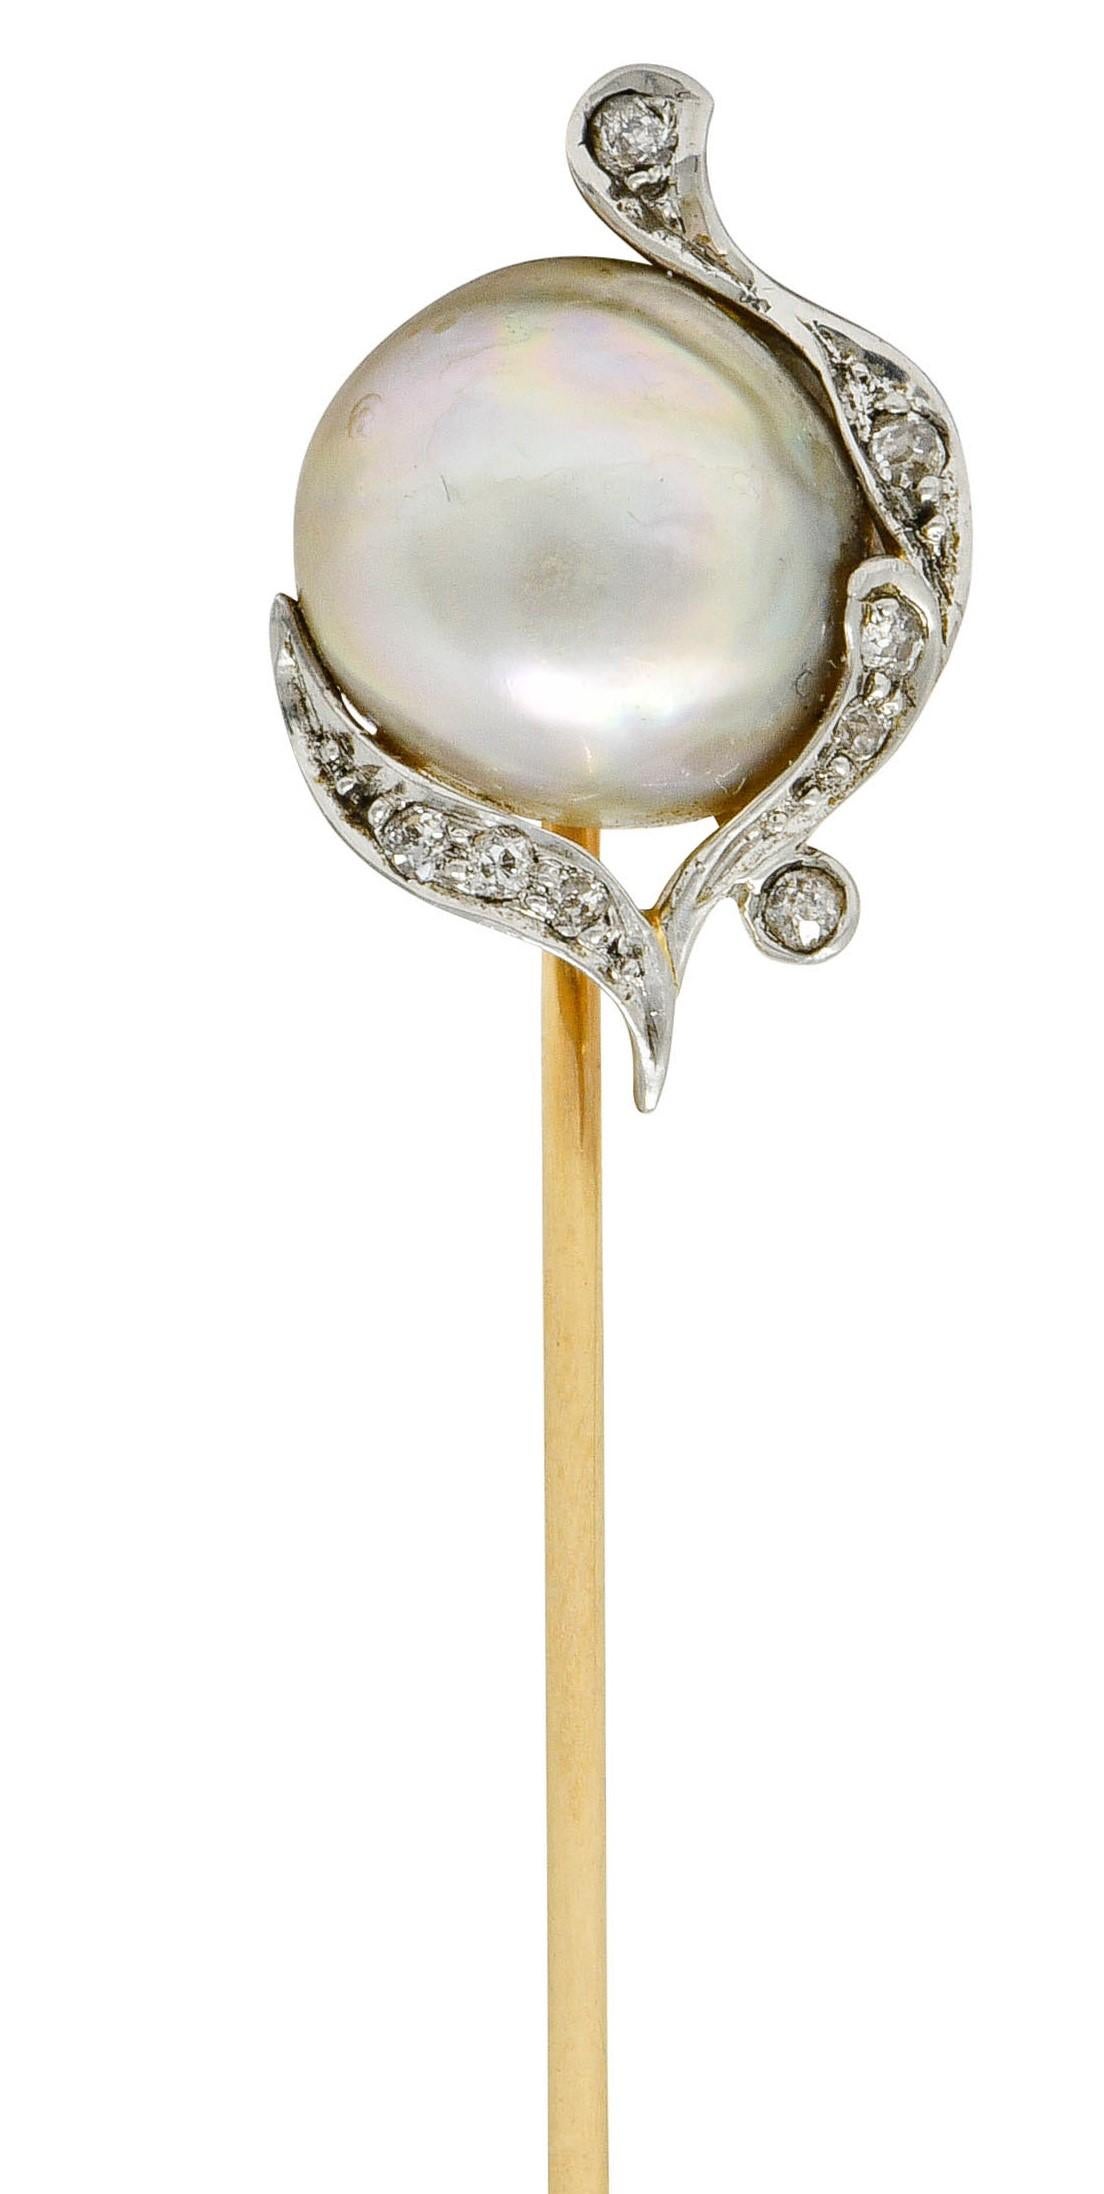 Centering a rounded baroque pearl measuring approximately 10.5 mm

Gray body color with strong spectral iridescence and good luster

Surrounded by organically rendered whiplash accented by old European cut diamonds

Weighing in total approximately